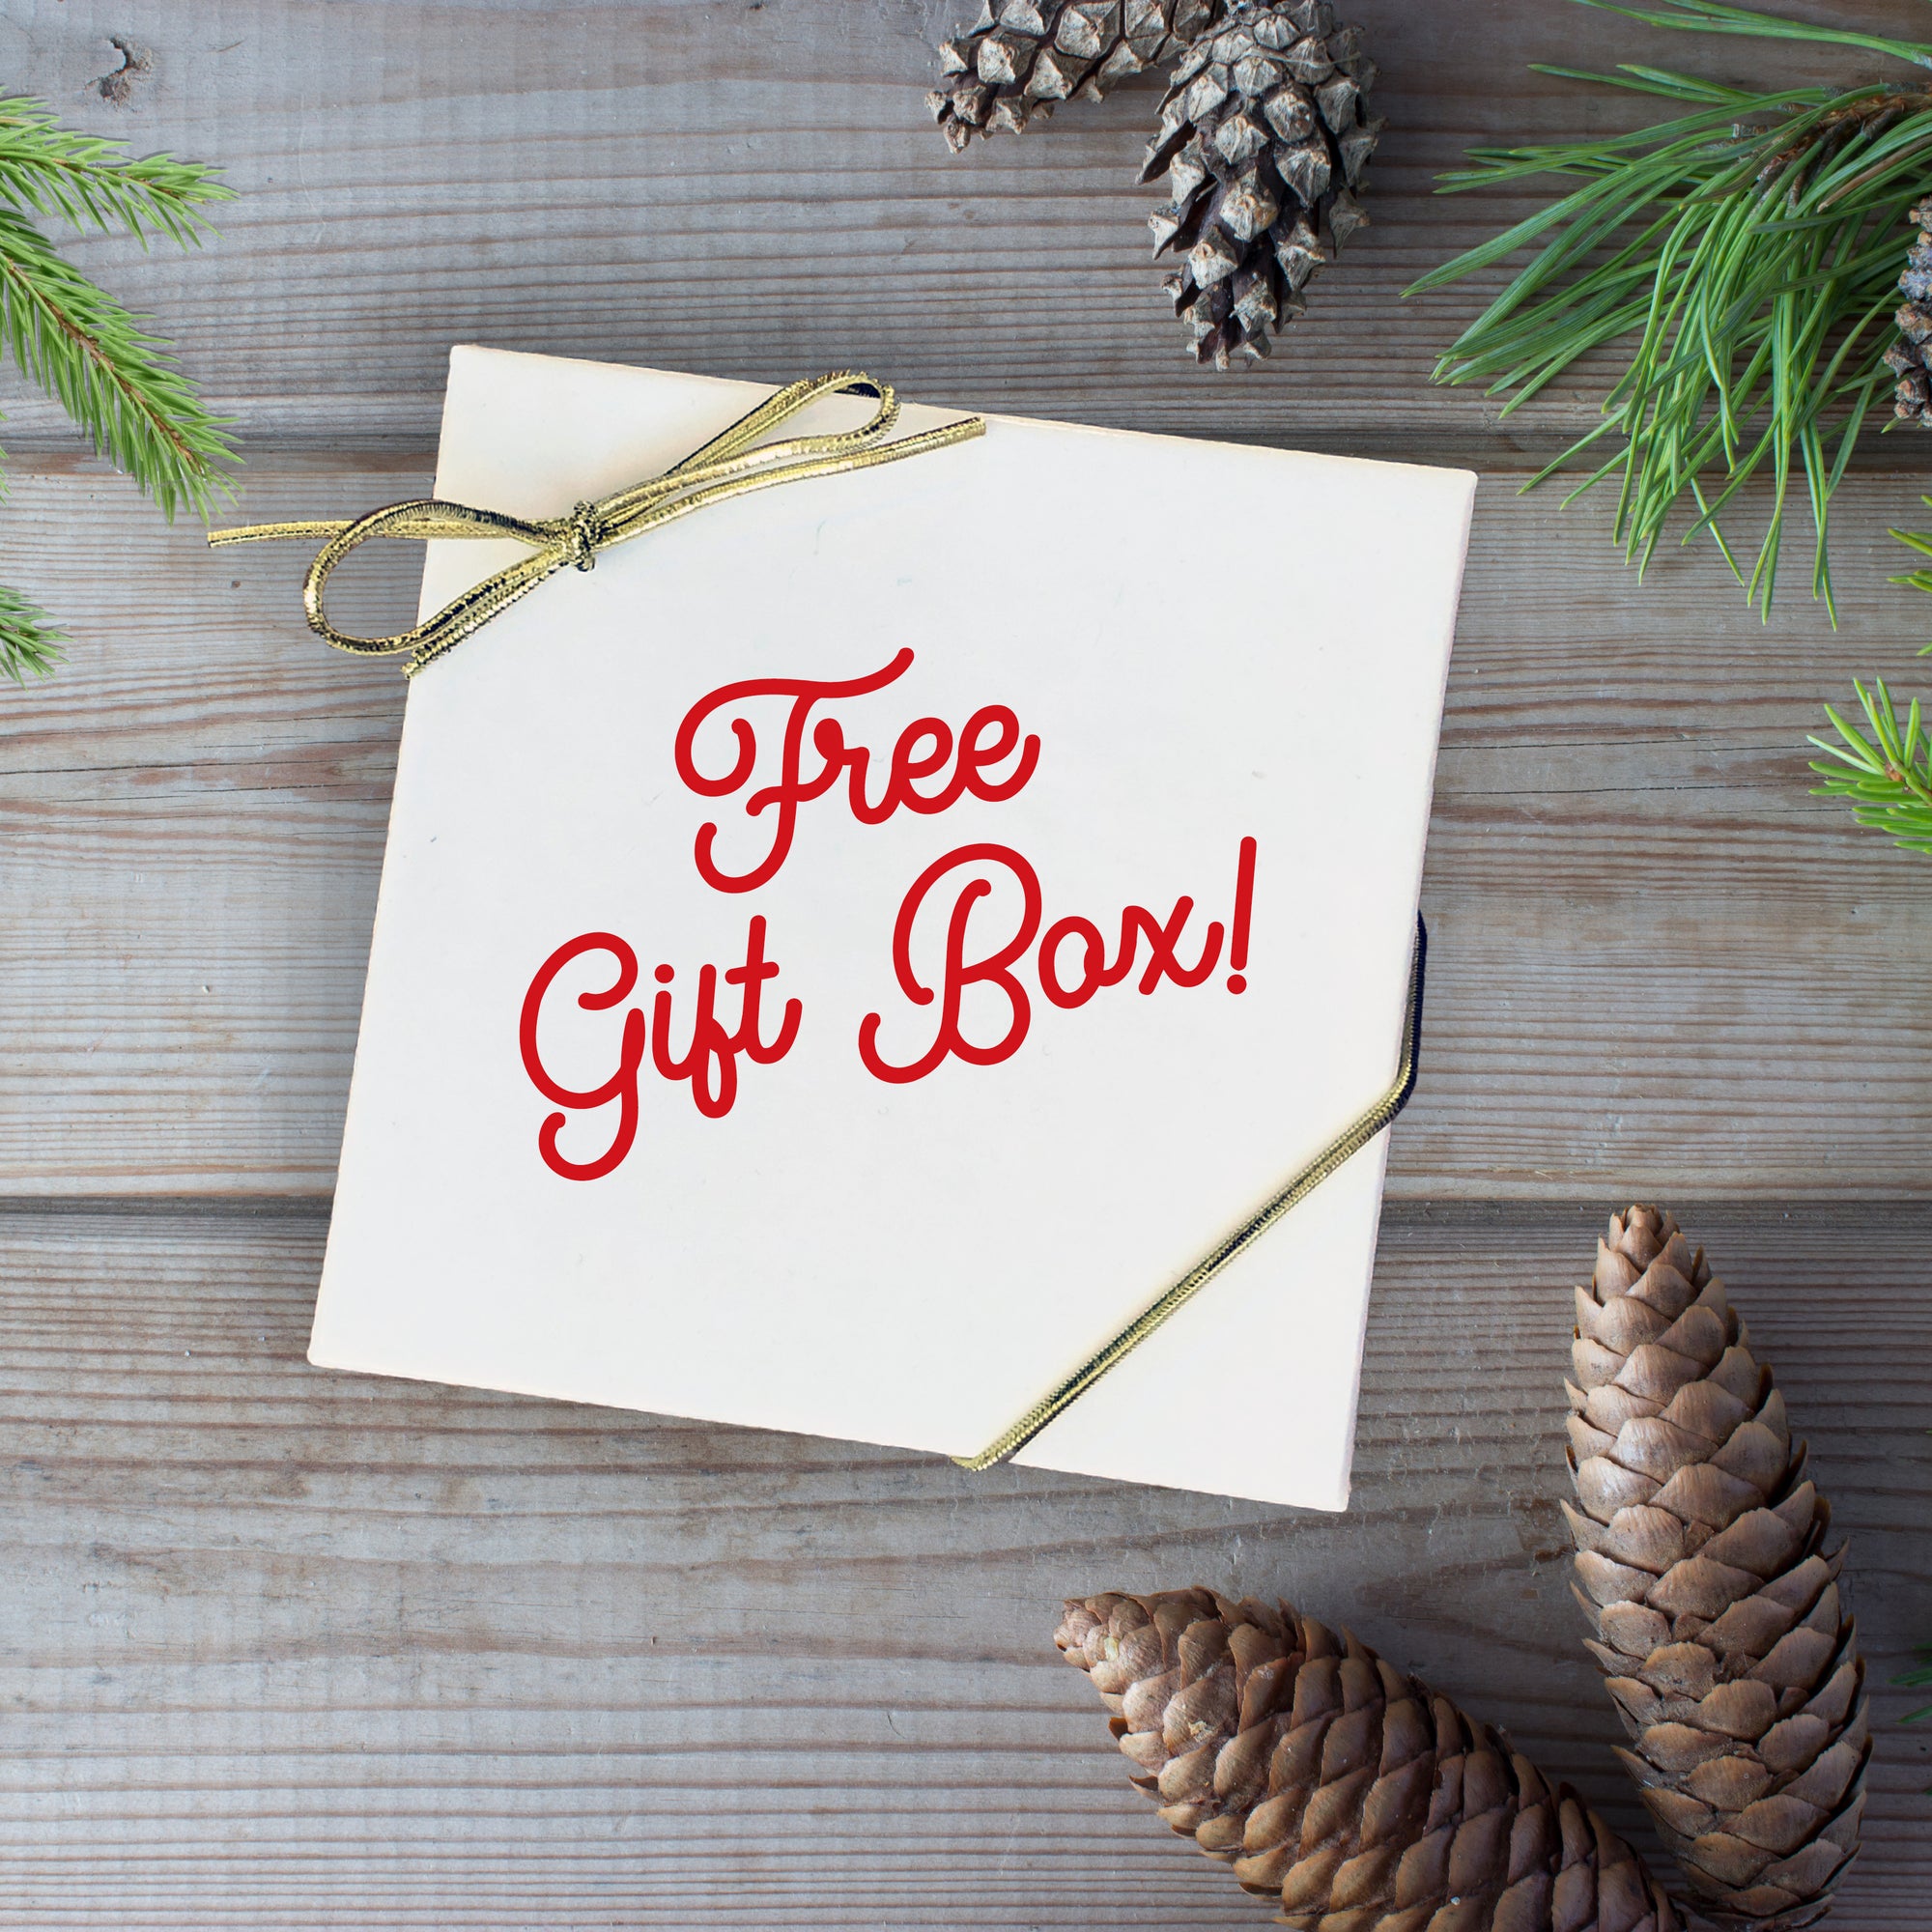 free gift box included!